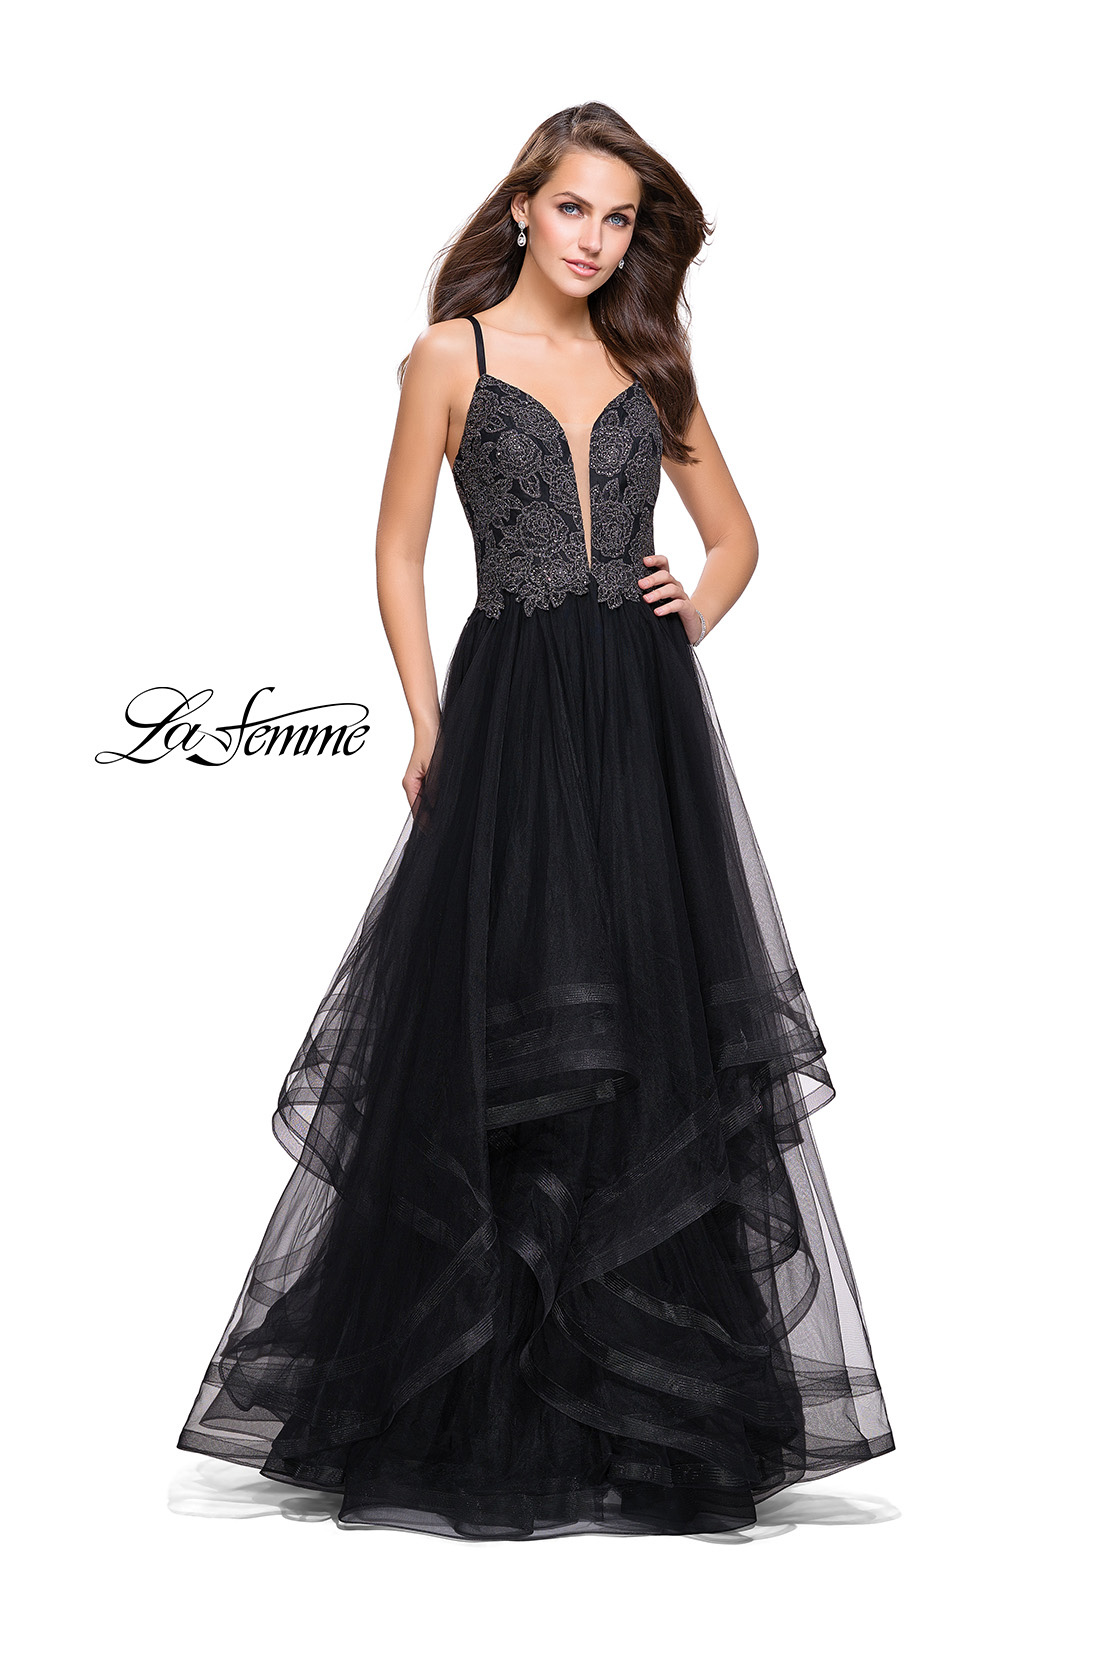 La Femme Black Prom Dress with Ruffle Tulle Skirt and Lace